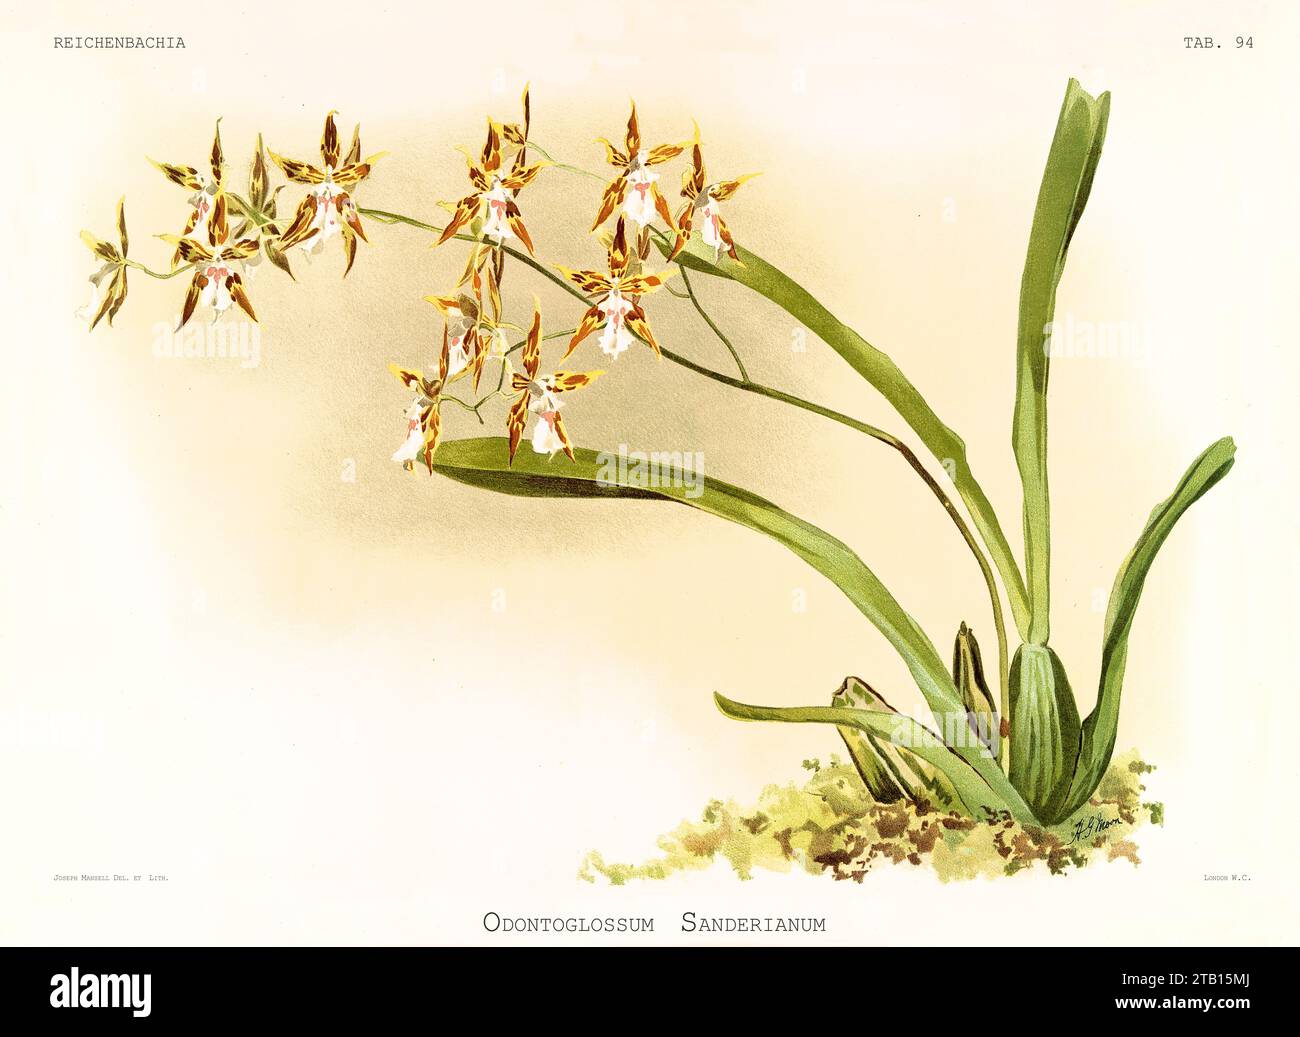 Old illustration of  Constricted Odontoglossum (Oncidium constrictum). Reichenbachia, by F. Sander. St. Albans, UK, 1888 - 1894 Stock Photo